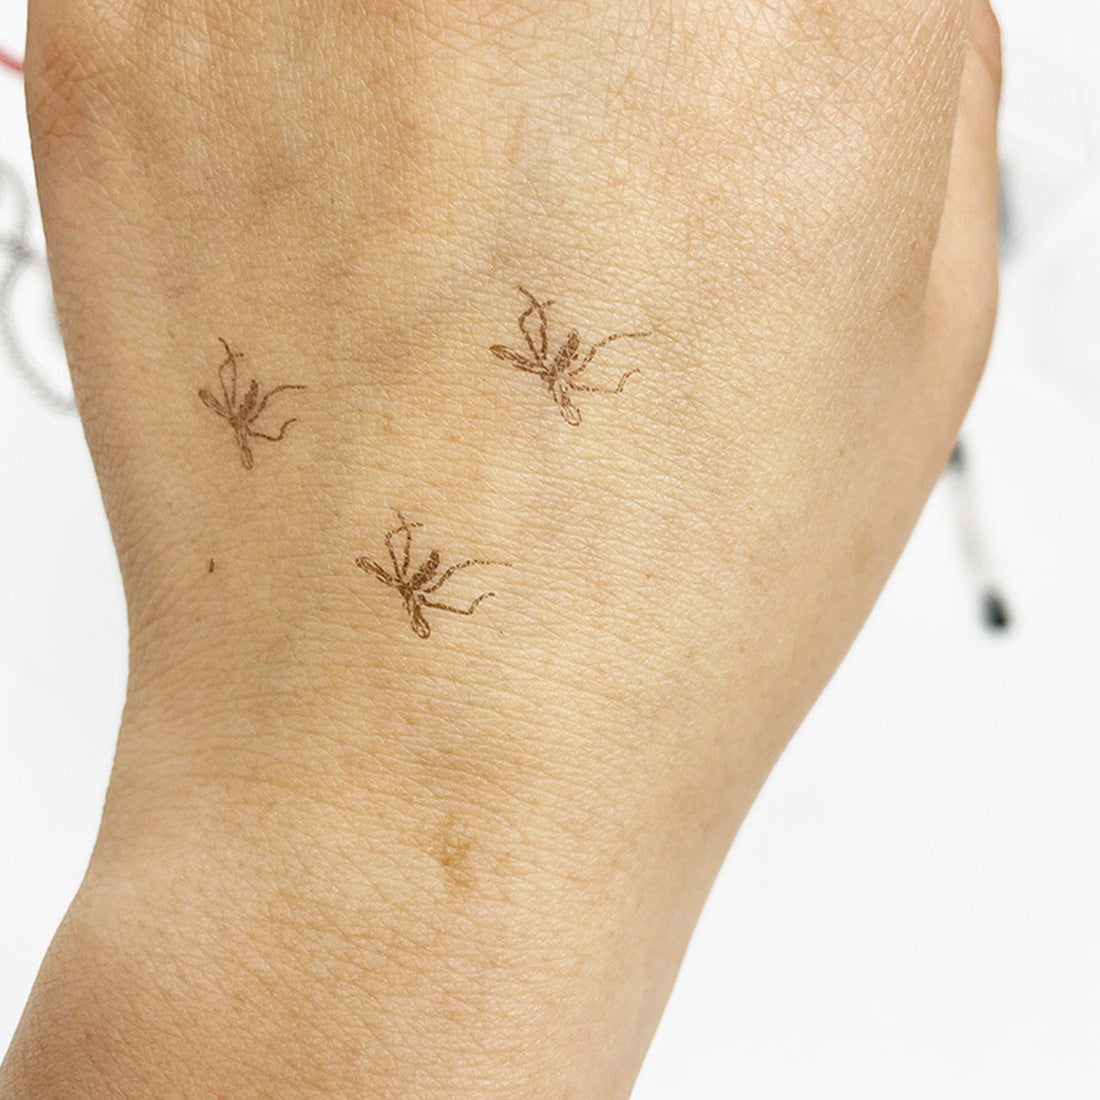 Mosquito Stamp By Havanex